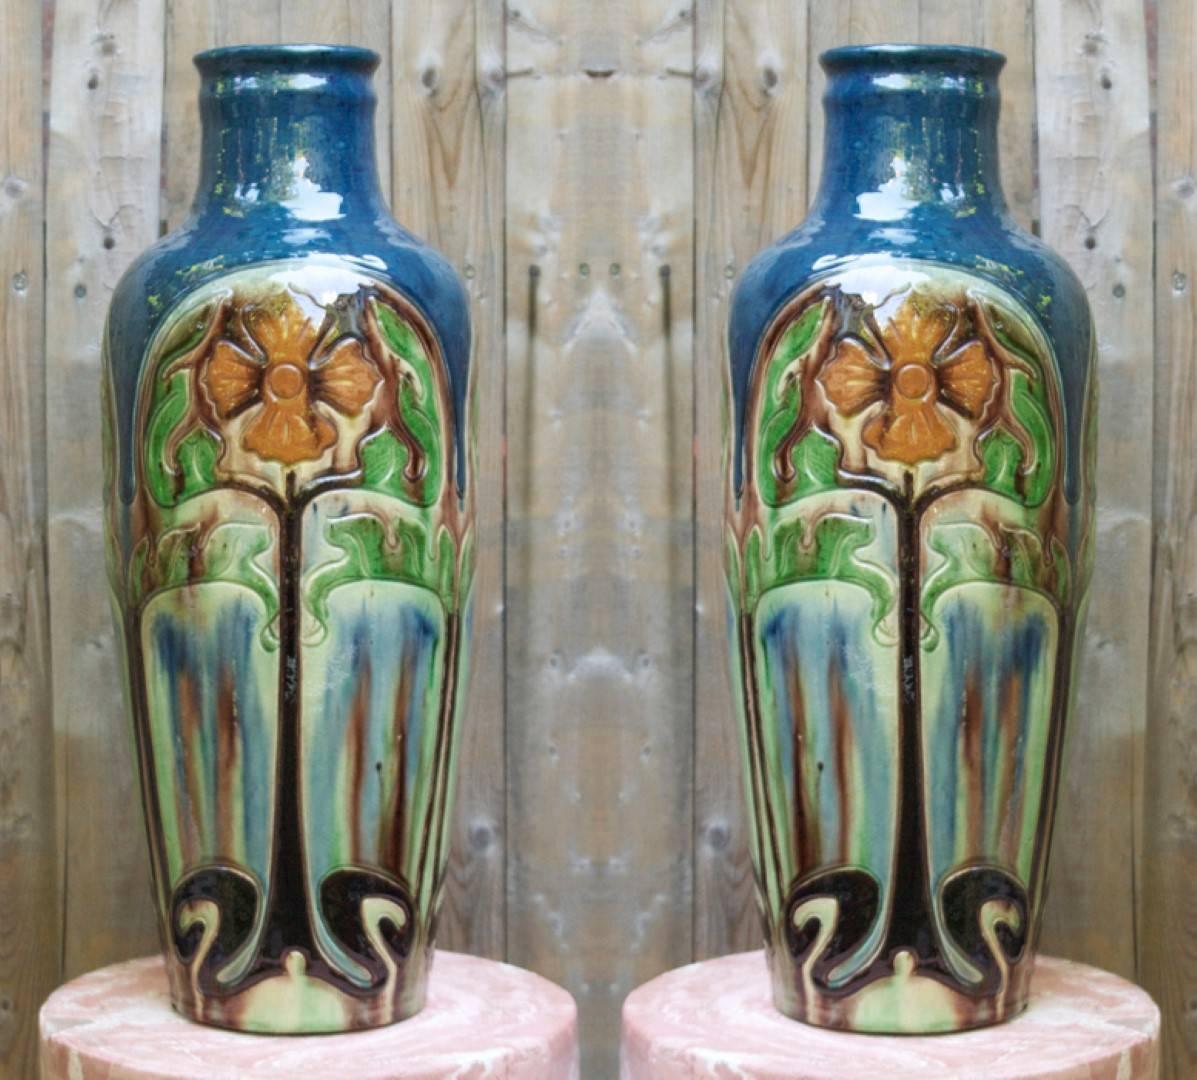 A pair of Belgian ceramic vases with Arts and Crafts stylized floral motifs.